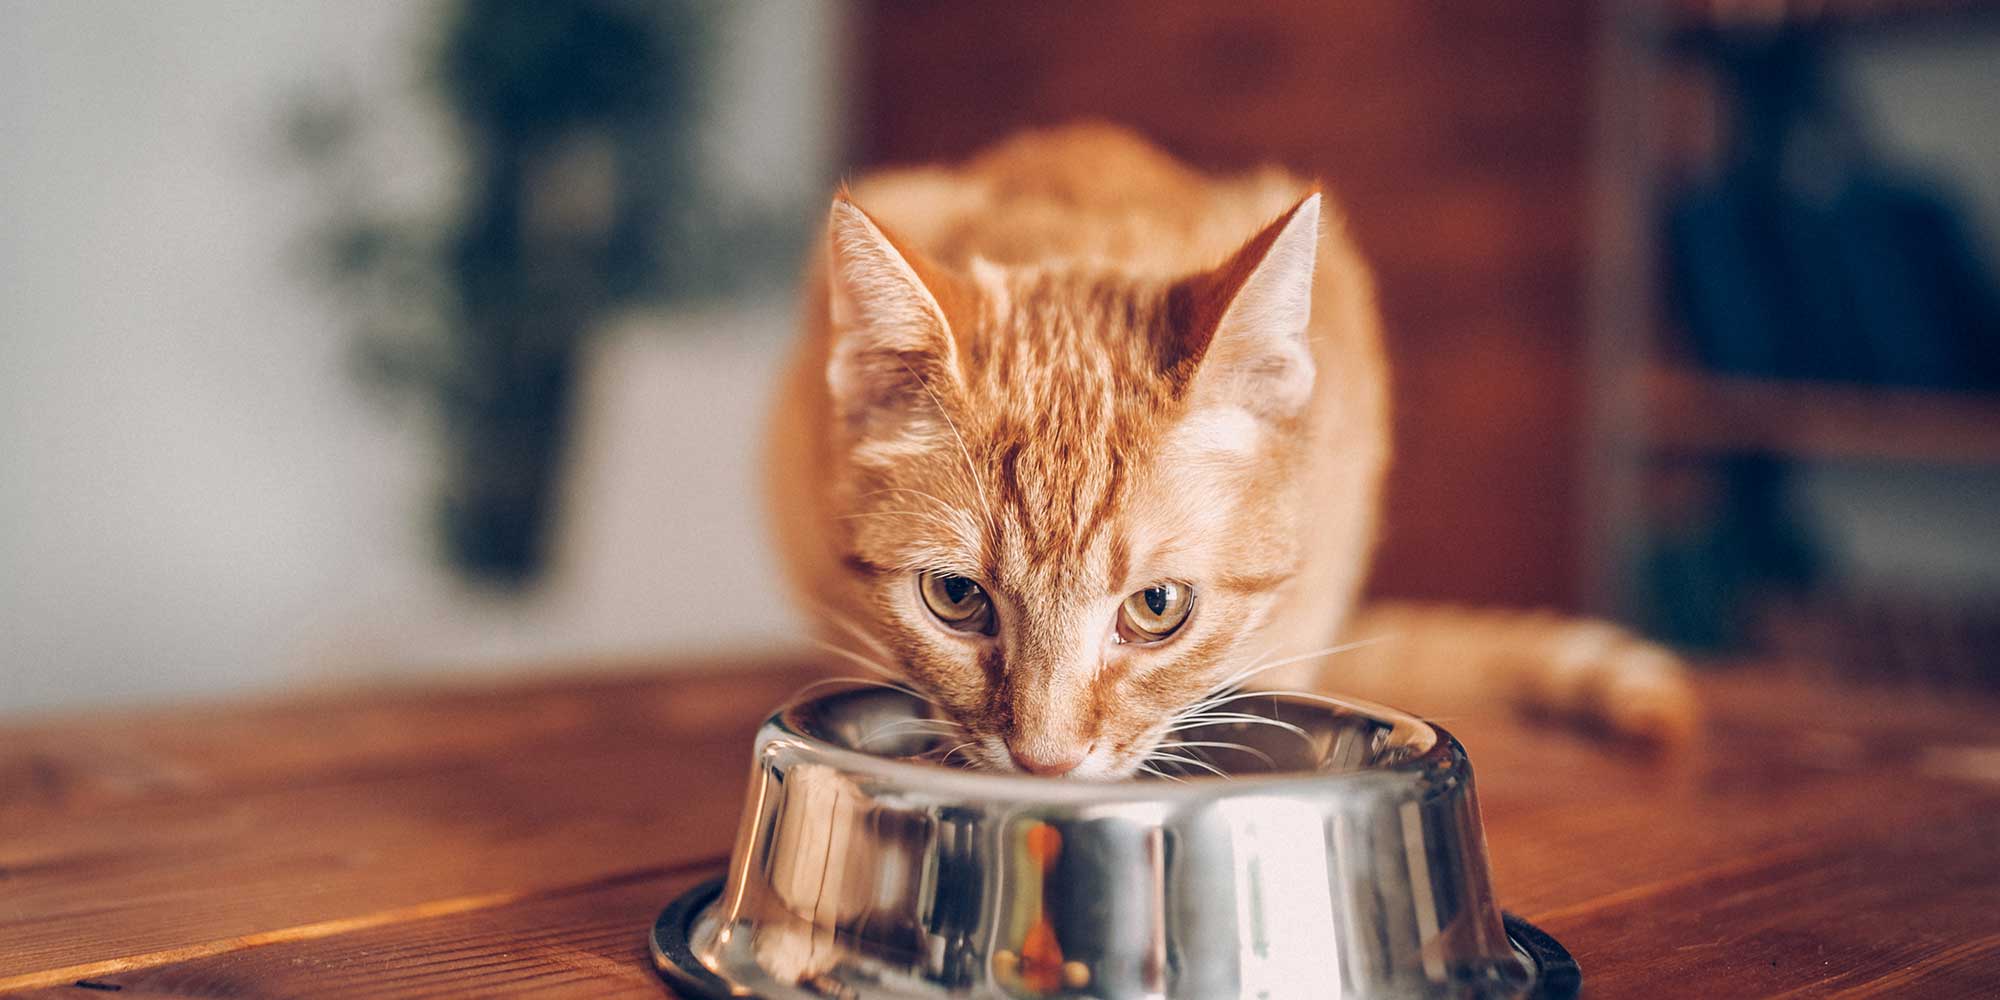 An orange cat eating from a bowl